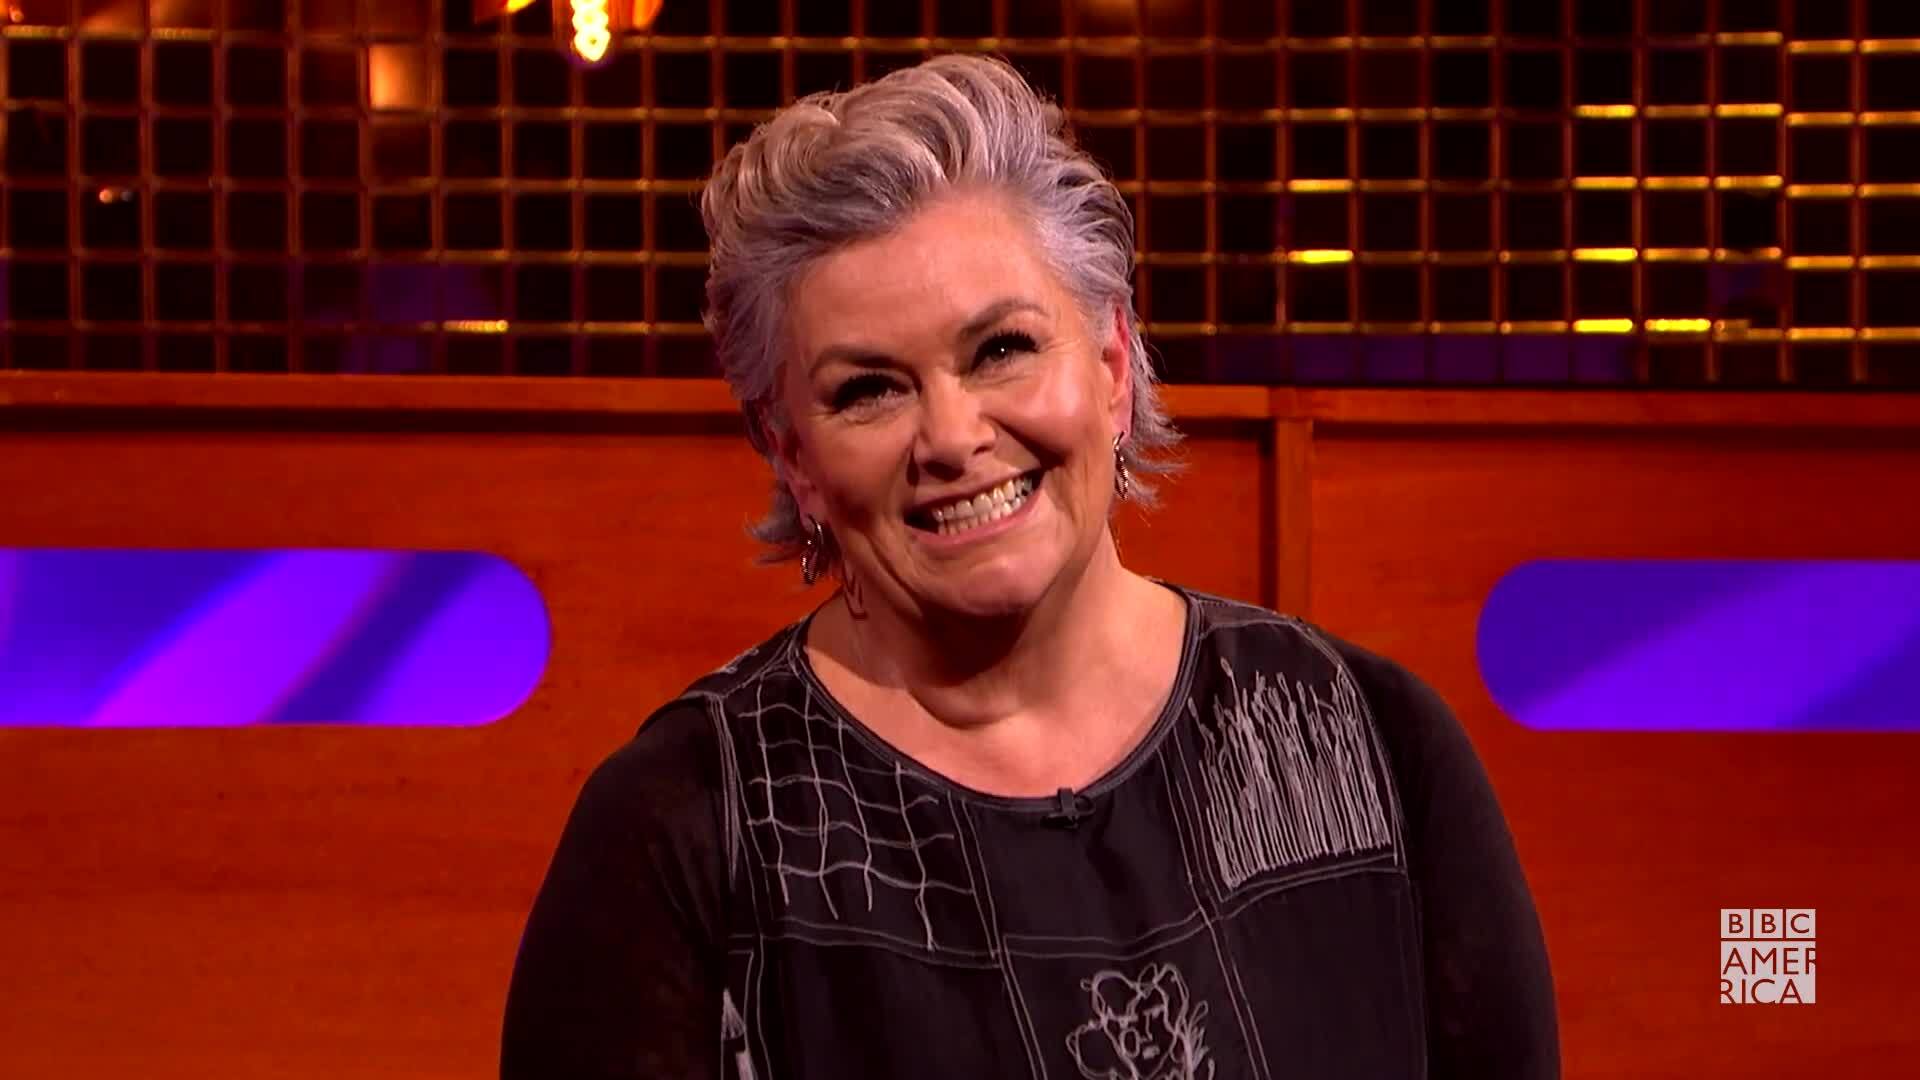 Watch Dawn French’s Wildly Inappropriate Joke to Prince Charles | The Graham Norton Show Video Extras